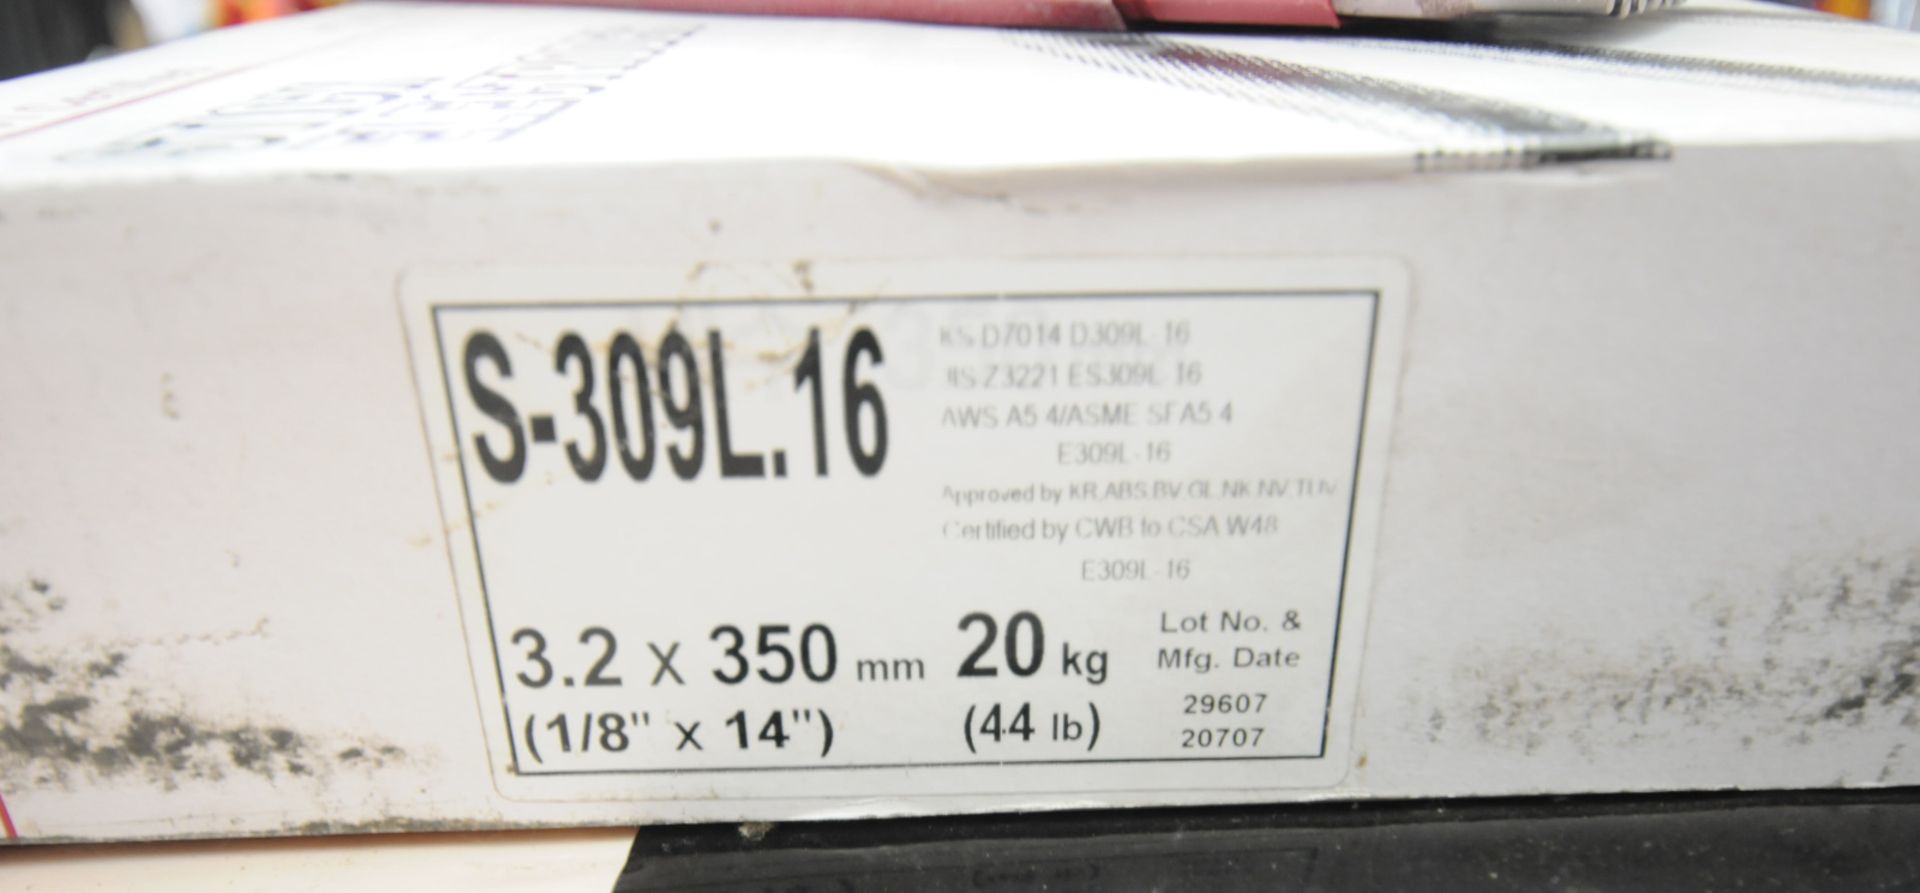 LOT/ (10) 44LB BOXES OF HYUNDAI S-309L.16 1/8"X14" STICK WELDING ELECTRODES CWB CERTIFIED TO CSA W48 - Image 3 of 4